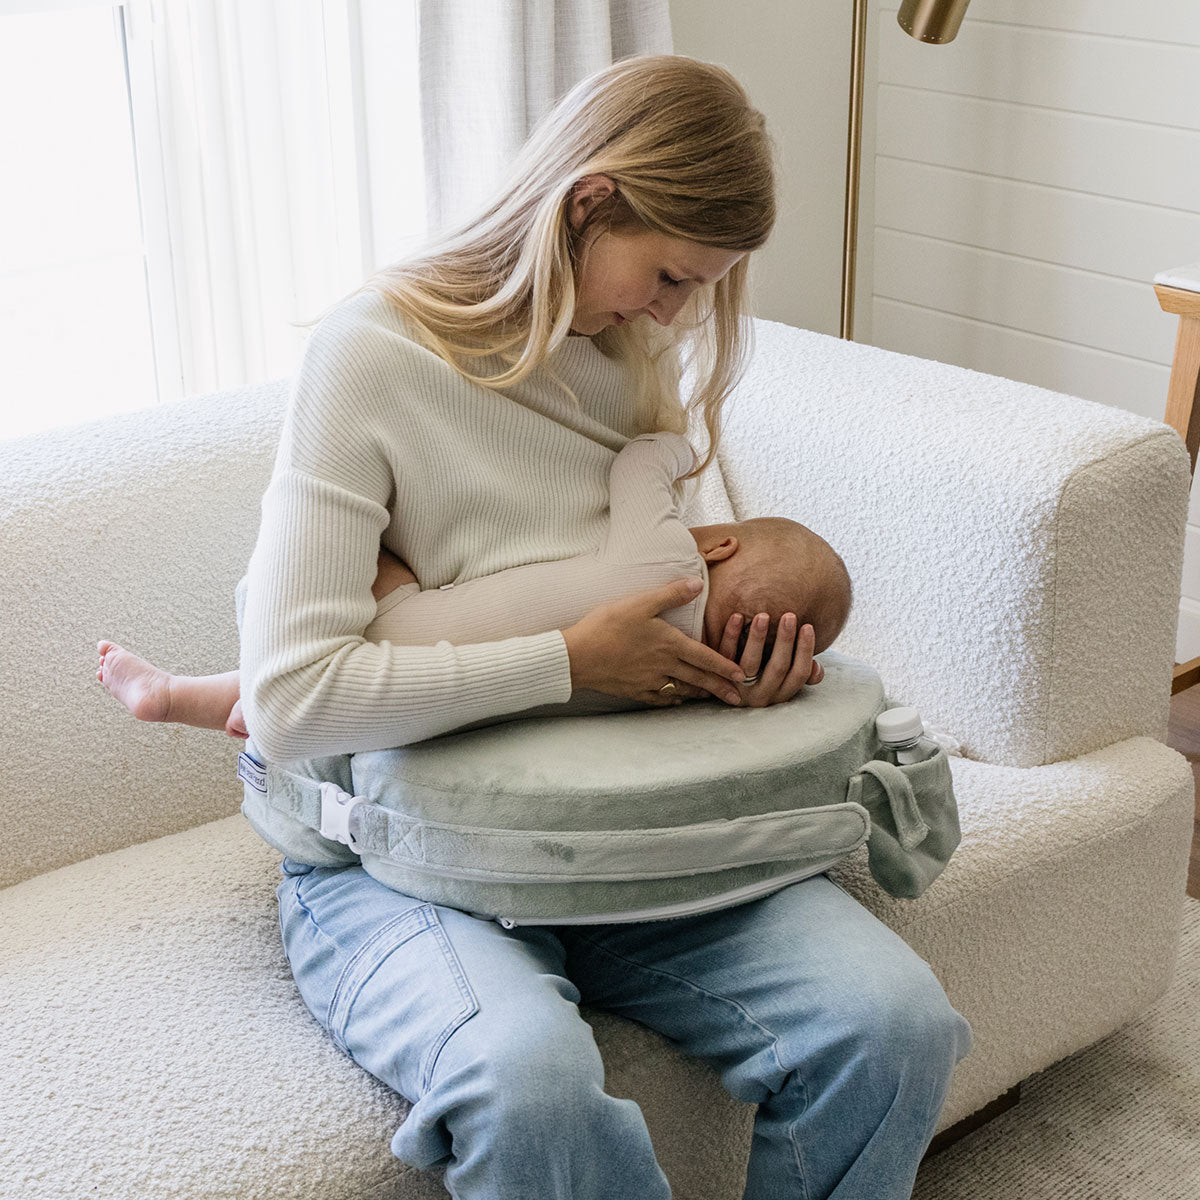 Shop #1 Nursing Pillows loved by millions of moms